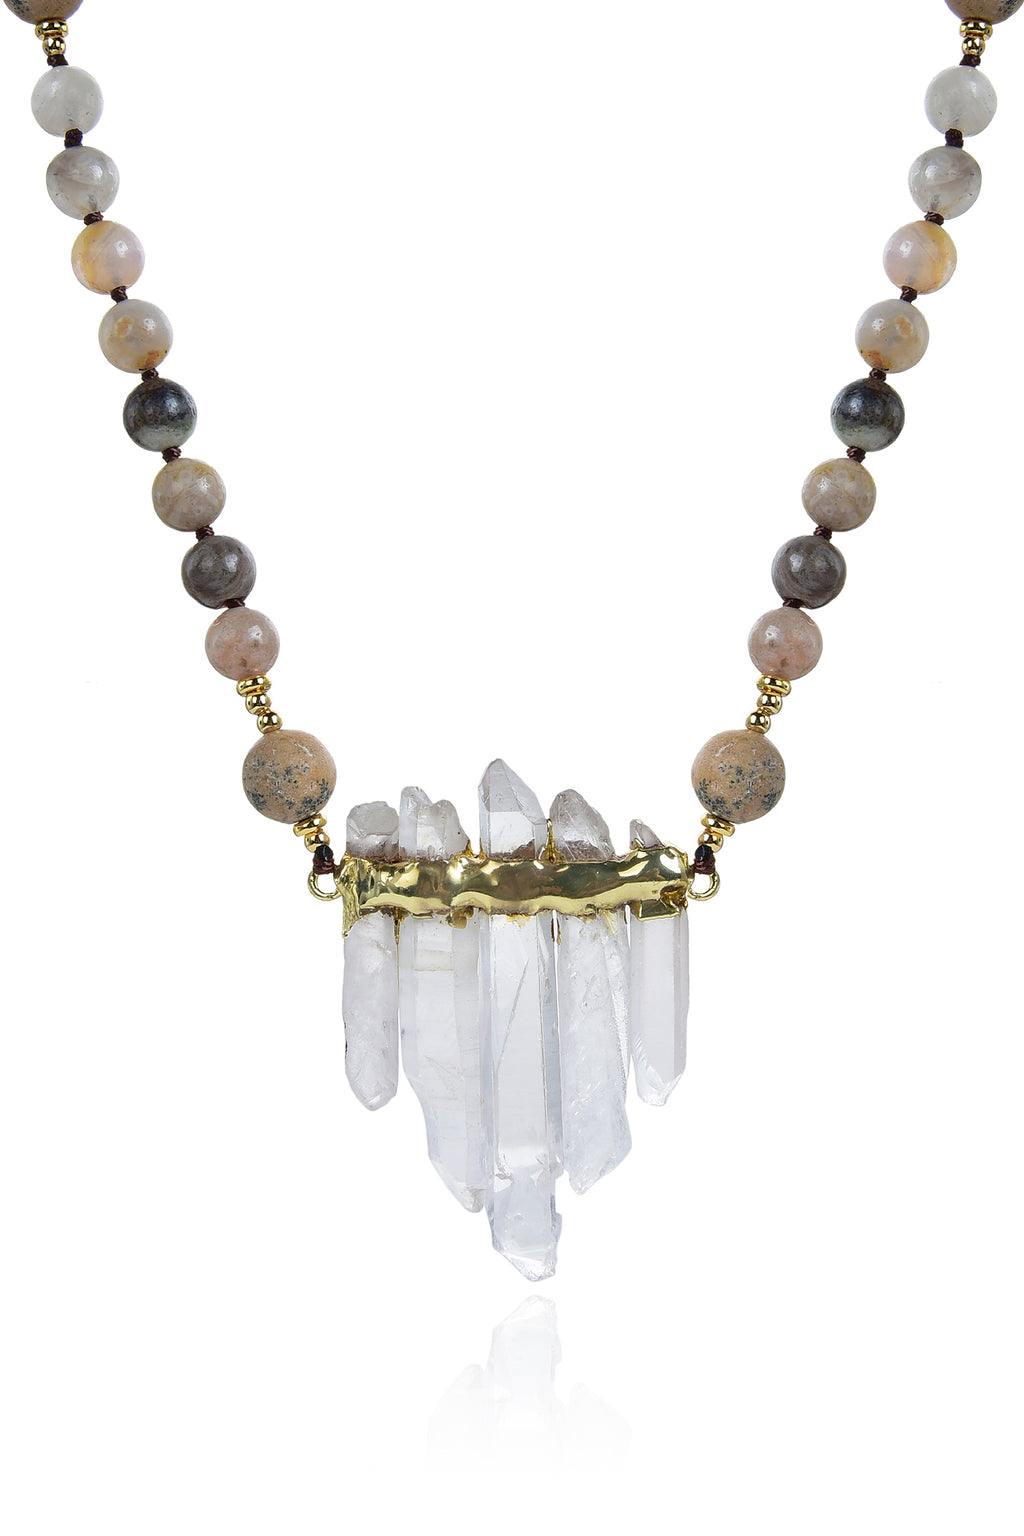 Close up view of pendant on grey agate beaded necklace. Pendant is composed of 5 quartz crystals in pyramid arrangement with gold band wrapped along top. Agate beads made of a variety of grey and brown colors compose the chain.